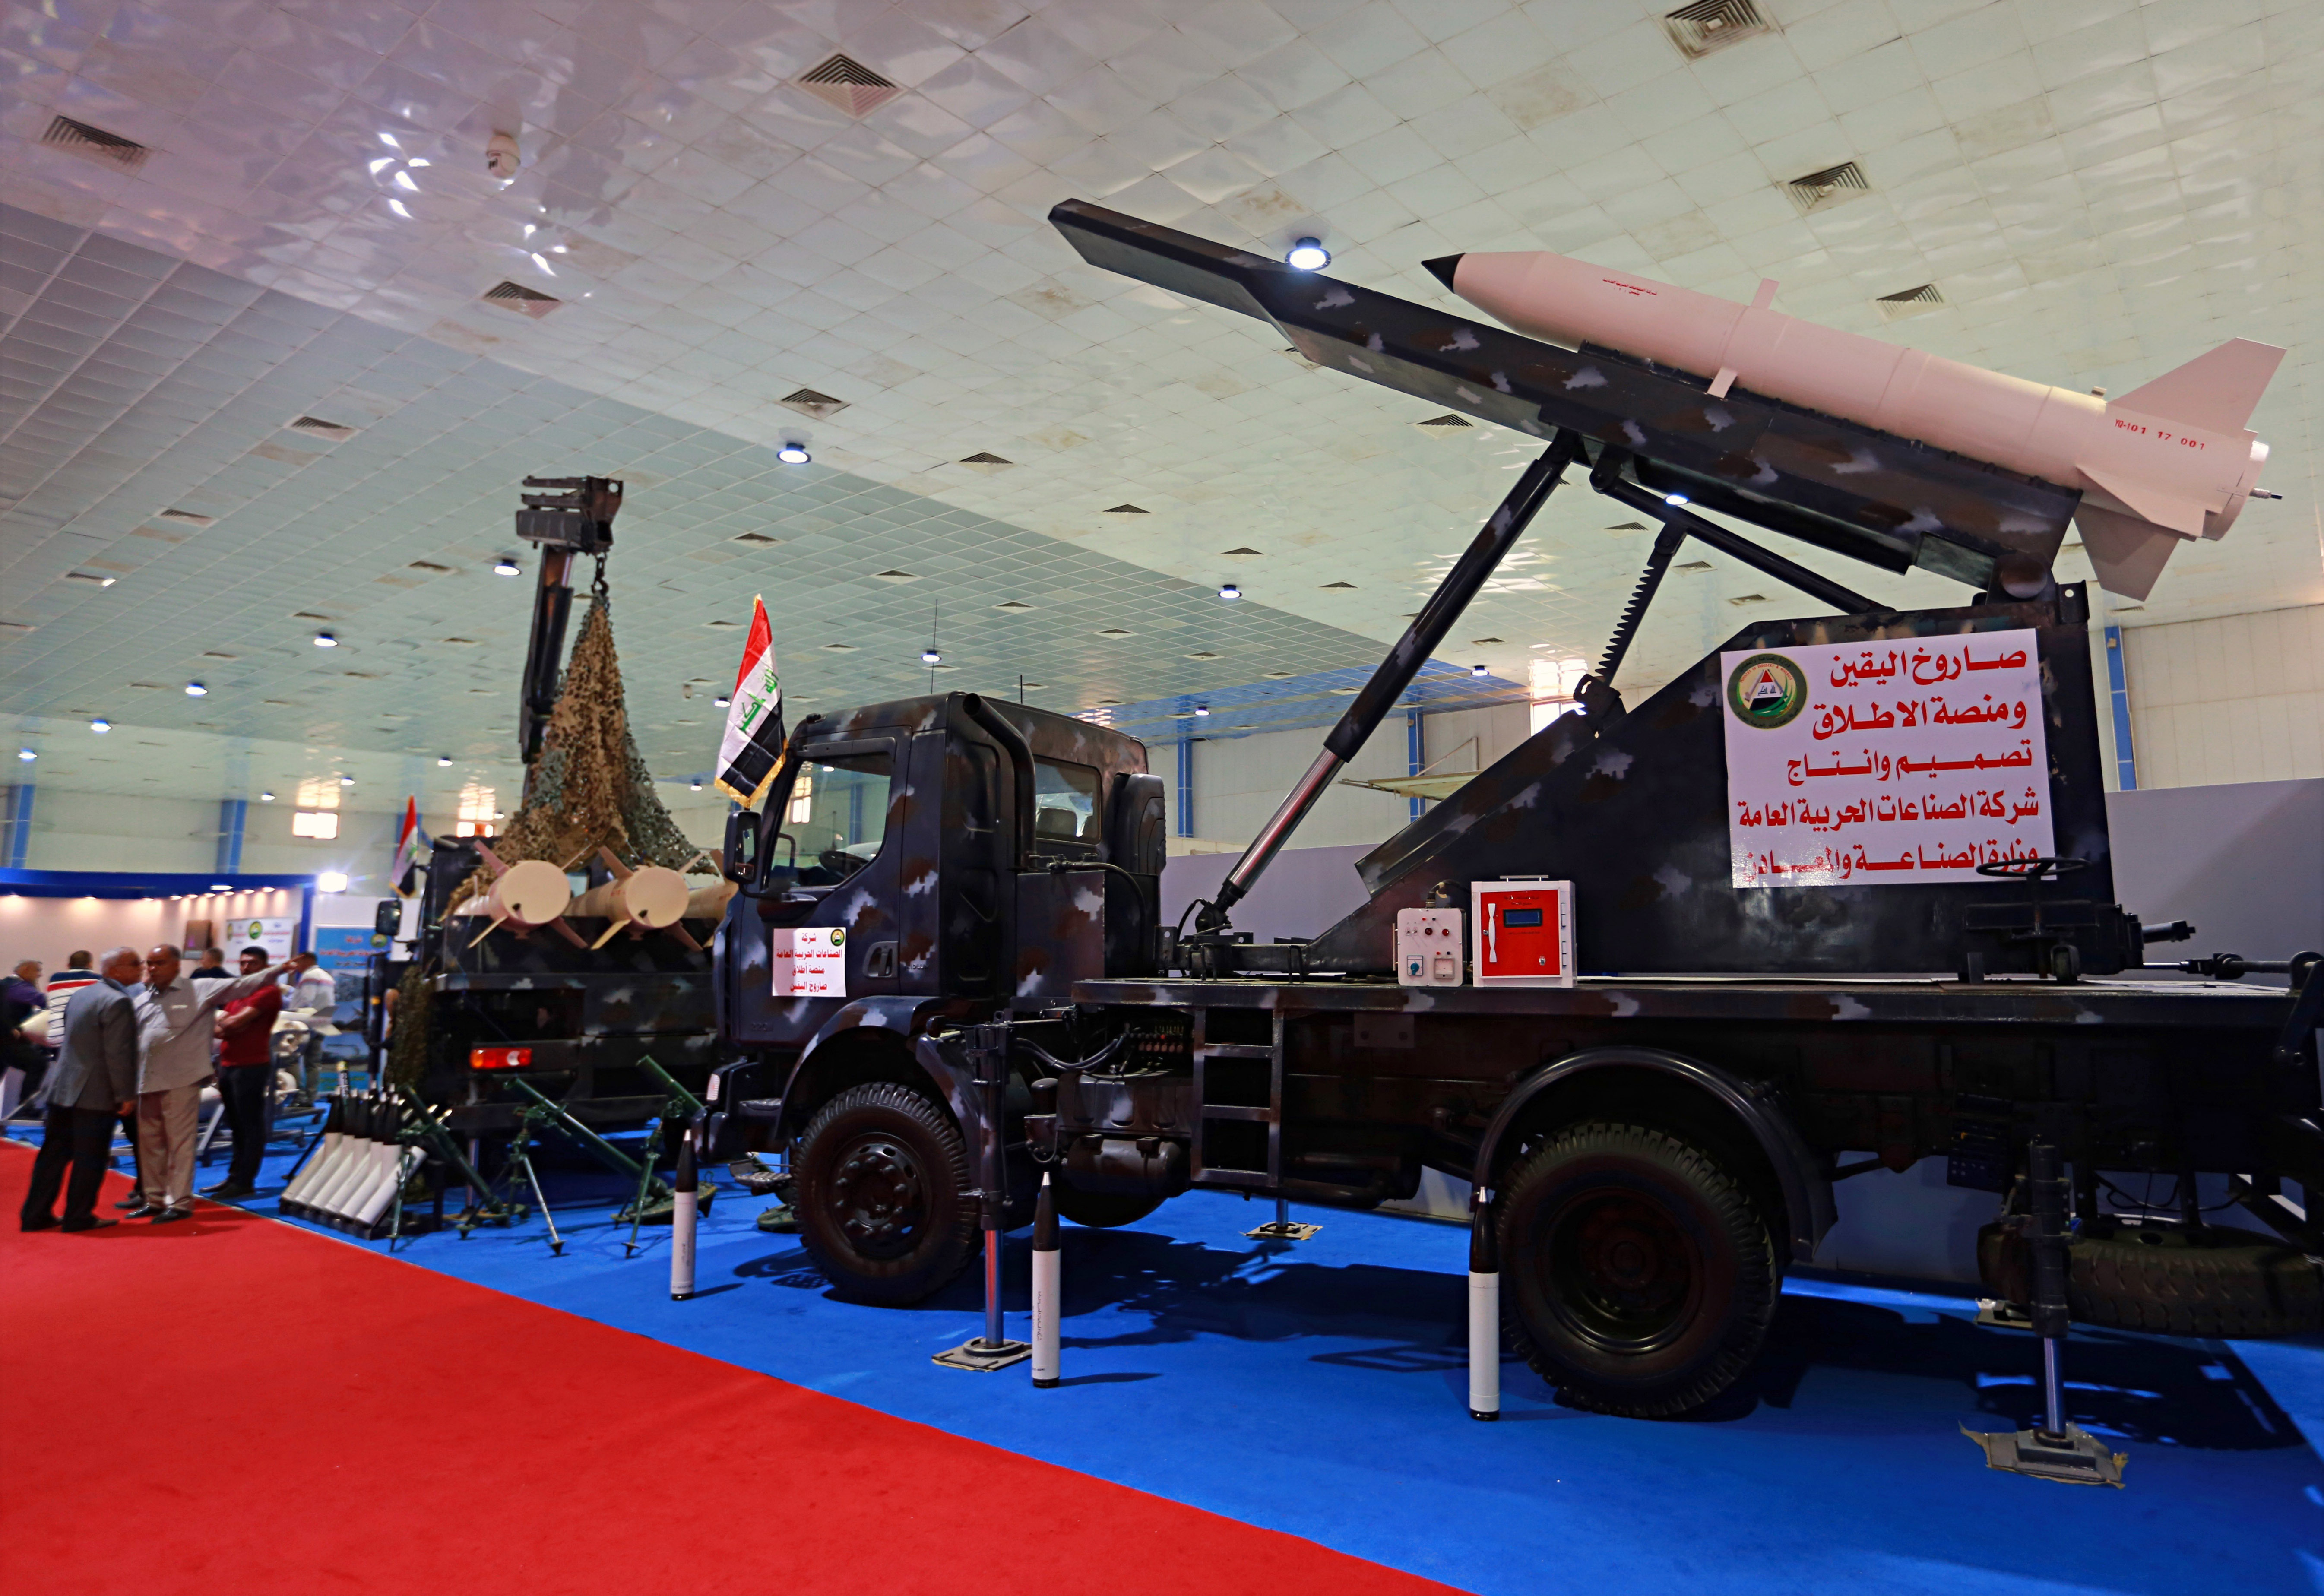 Rockets and launchers manufactured by Iraqi factories for military production are on display in the Iraqi section of the seventh annual weapons exhibition organized by the Iraqi ministry of defense at the Baghdad International Fairgrounds, Iraq, Tuesday, March, 13, 2018. (AP Photo/Khalid Mohammed)